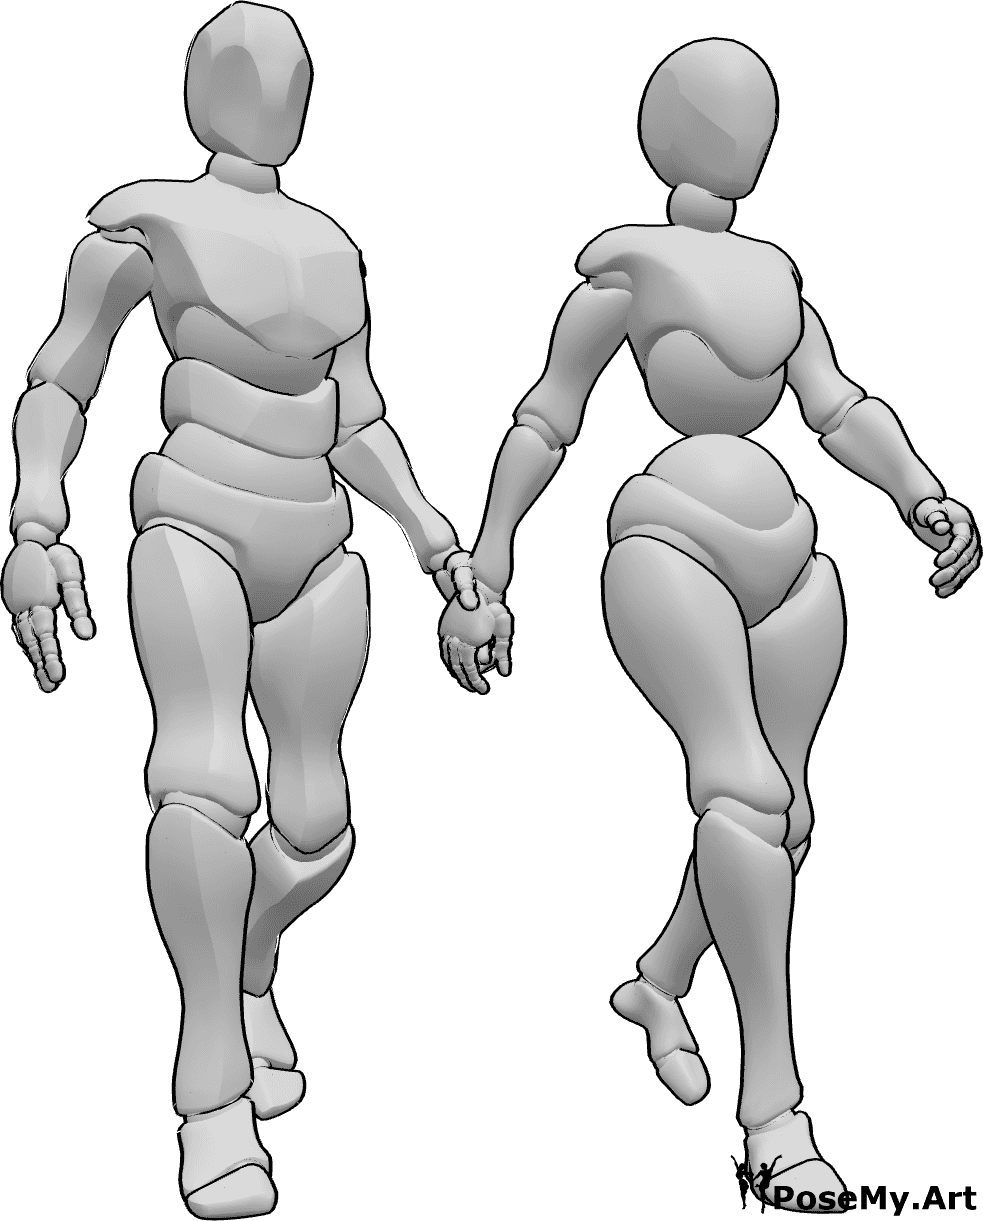 Pose Reference- Stressed couple walking pose - Angry couple is walking together, holding each others hands, walking in a hurry